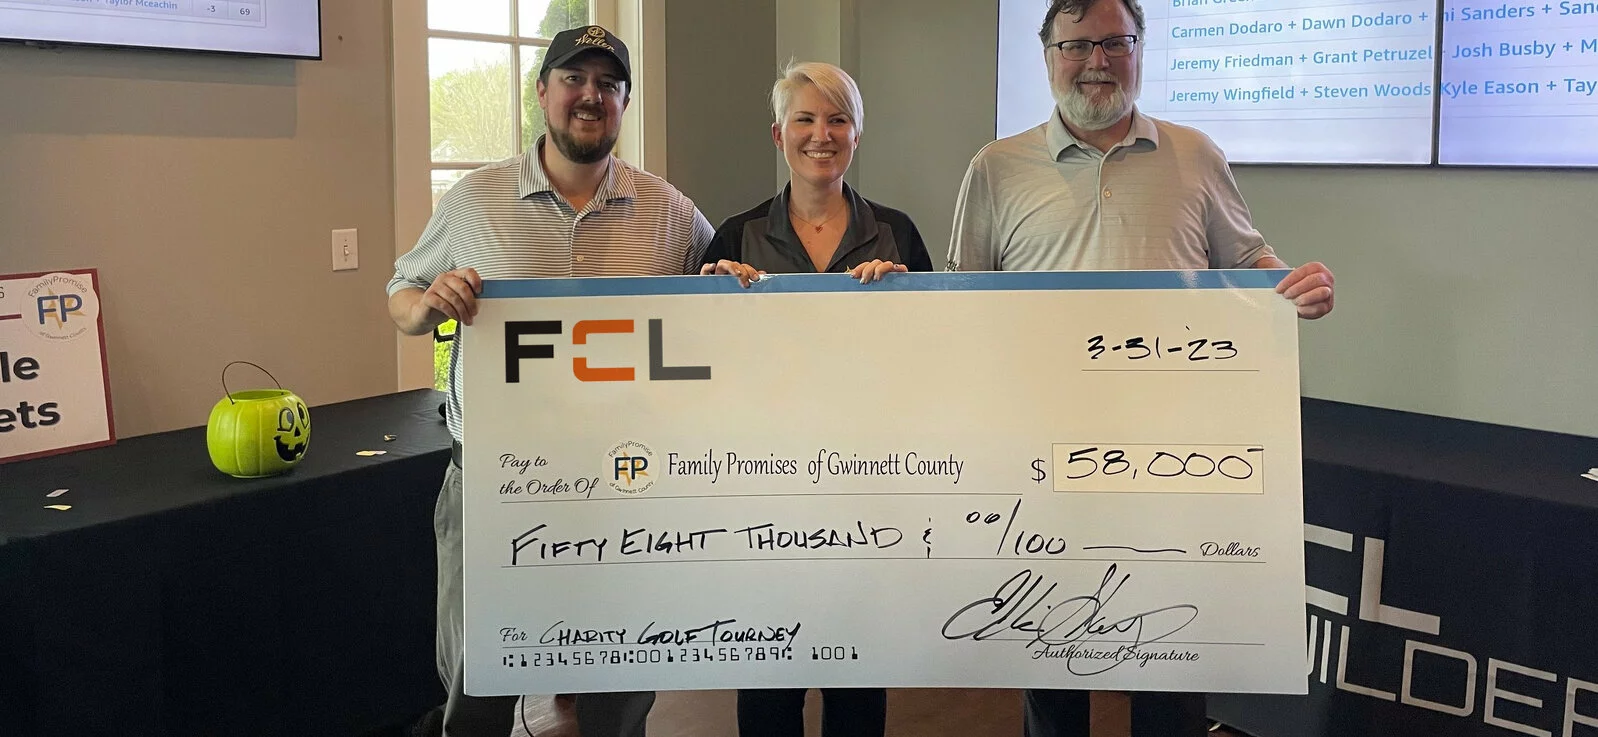 FCL Team Members holding a giant check for $58,000